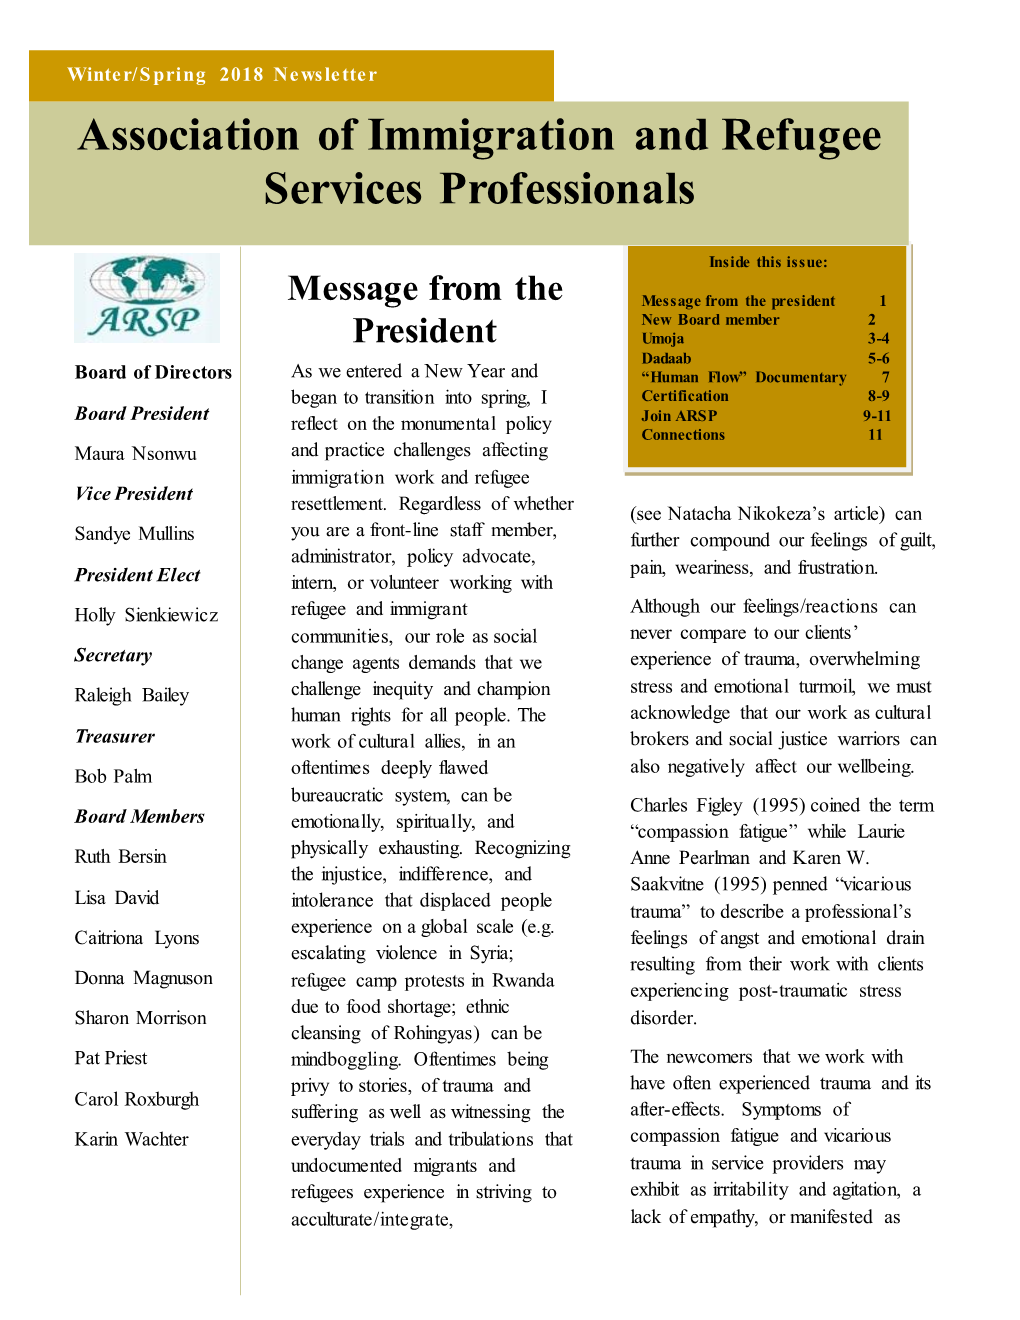 Association of Immigration and Refugee Services Professionals